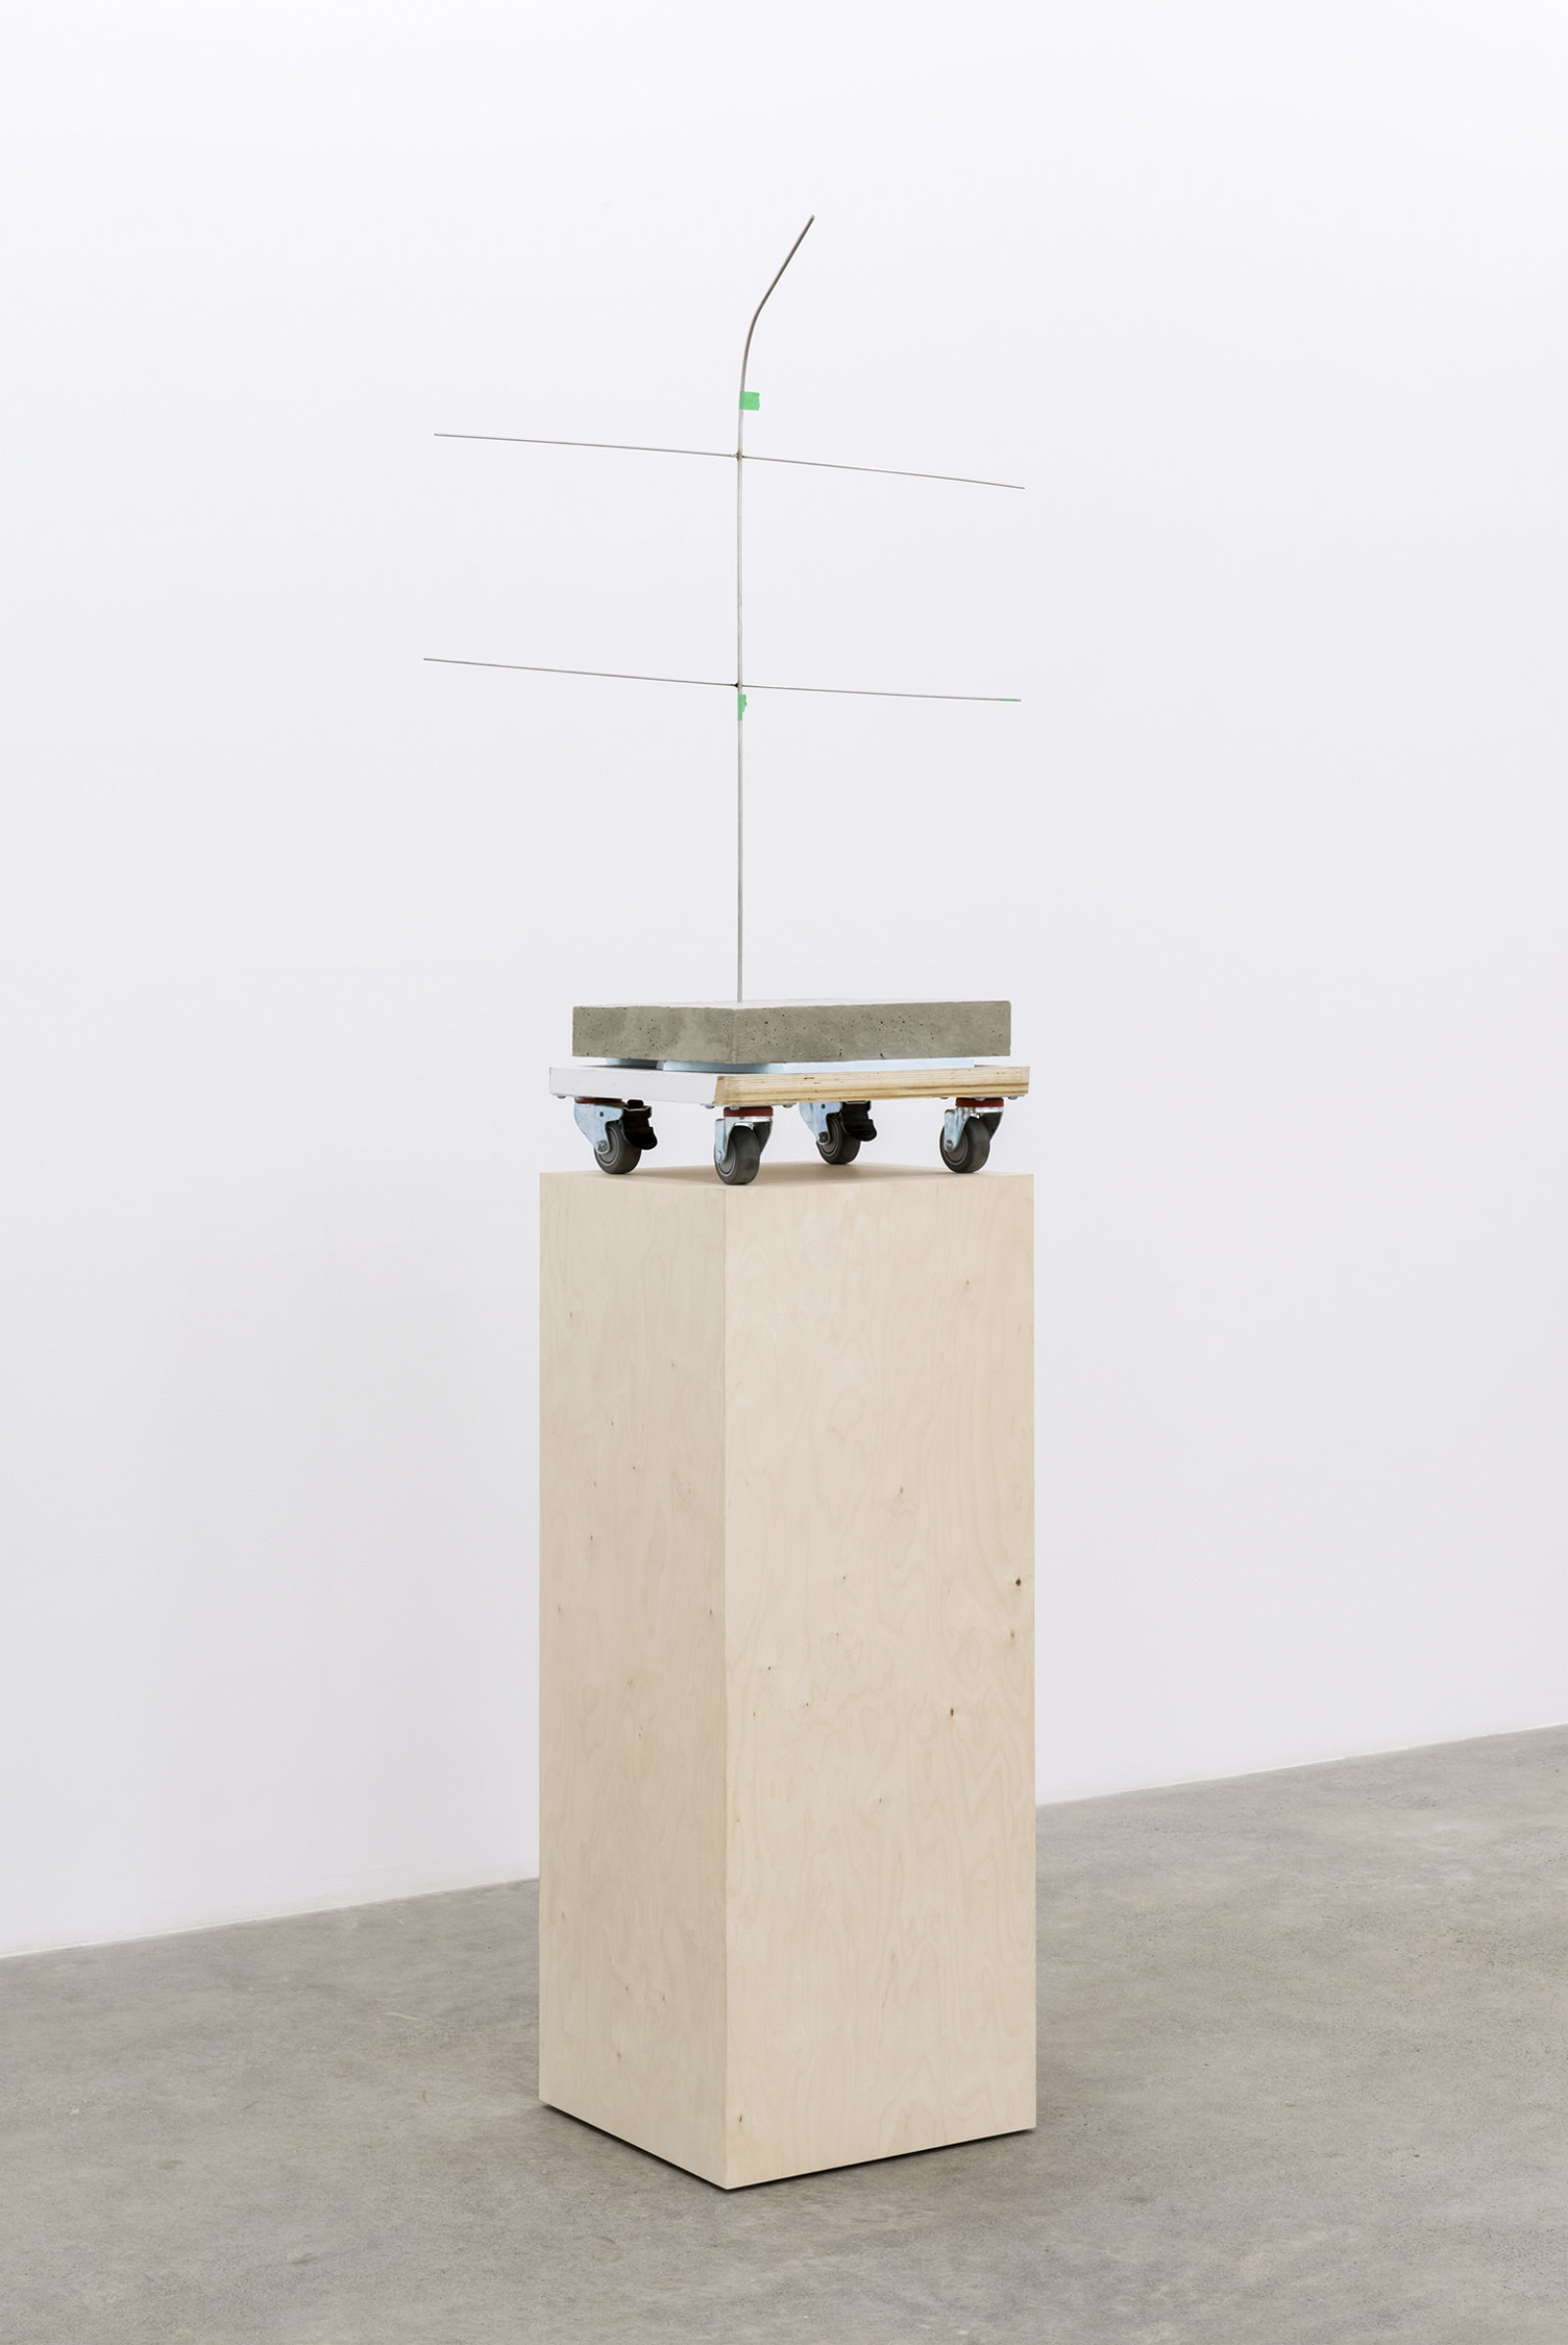 Duane Linklater, Thunderbird Woman (after Daphne Odjig), 2016, concrete, welded stainless steel, utility cart, insulation, tape, wood plinth, 97 x 18 x 36 in. (246 x 46 x 91 cm)